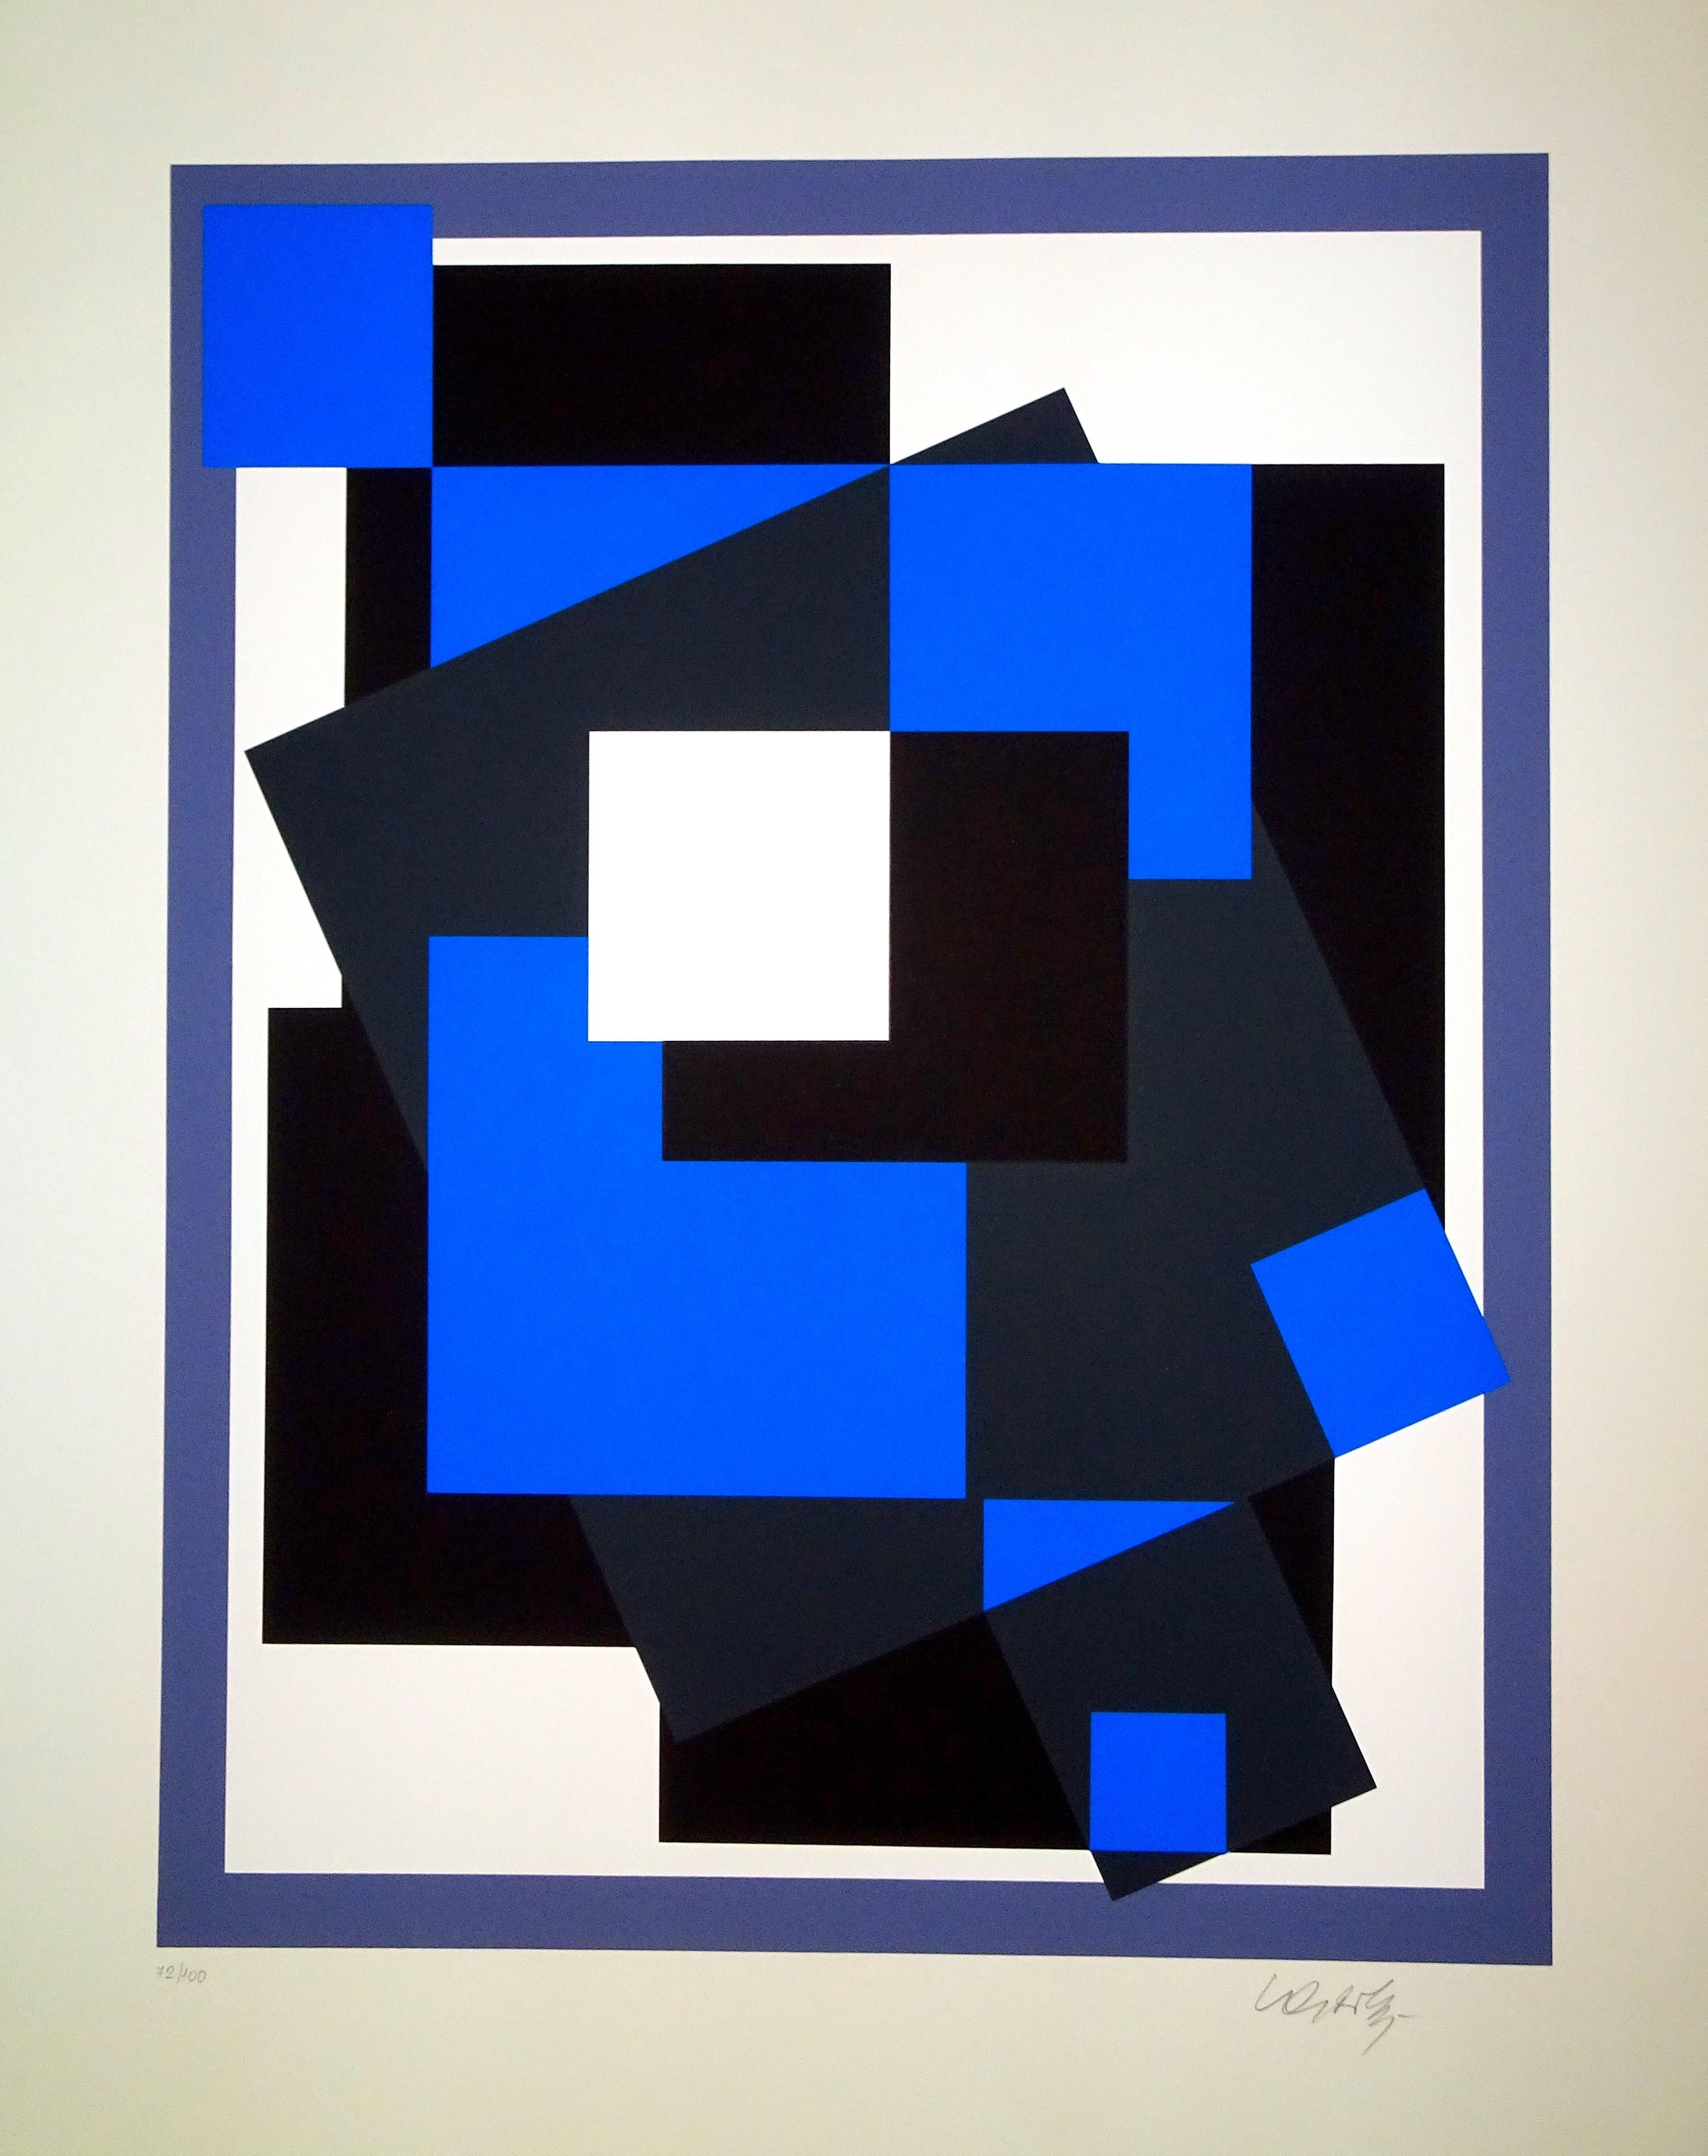 Black And Blue Composition is a wonderful serigraph with a black and blue abstract composition realized by Victor Vasarely.
The plate is from the portfolio Les Années Cinquante edited by Pesti Mühely, Budapest, in 1989. Hand-signed by the artist on